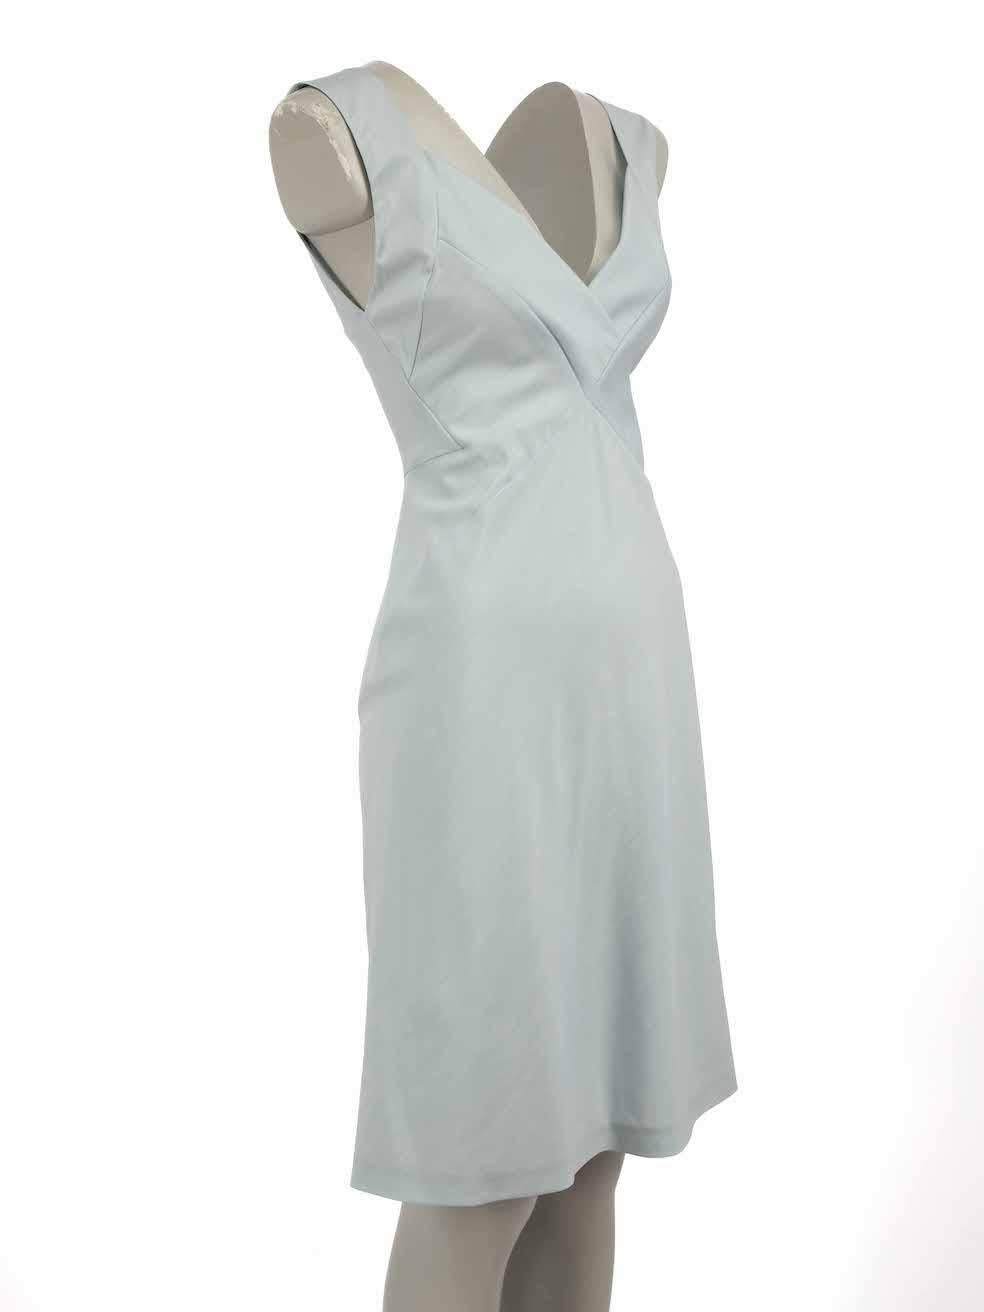 CONDITION is Very good. Hardly any visible wear to dress is evident on this used Narciso Rodriguez designer resale item.
 
 
 
 Details
 
 
 Blue
 
 Wool
 
 Knee length dress
 
 V neckline
 
 Sleeveless
 
 Back zip closure with hook and eye
 
 
 
 
